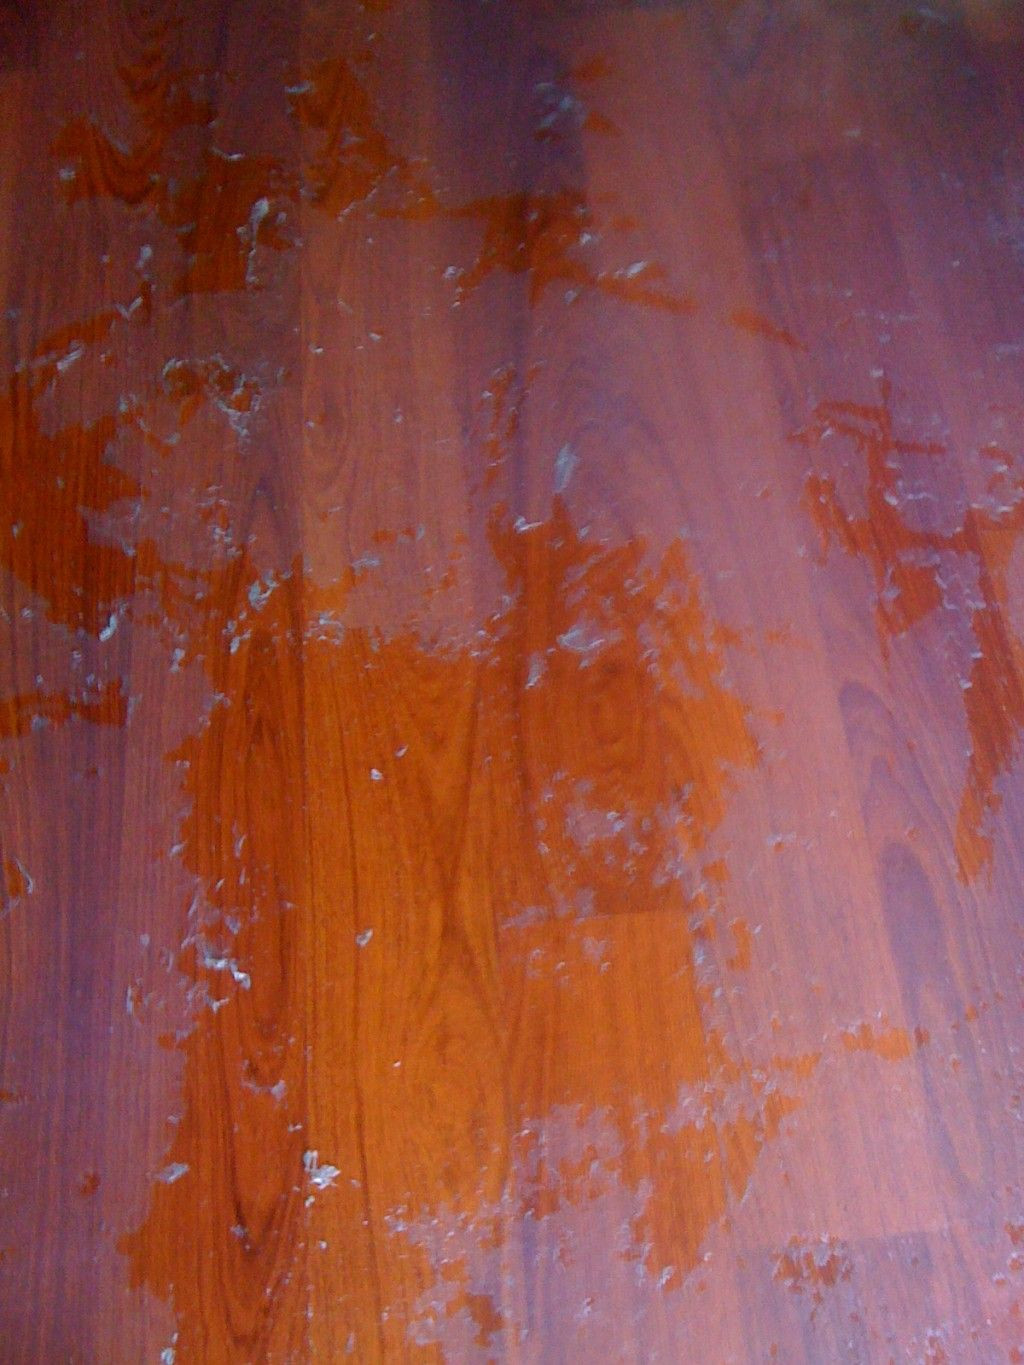 hardwood flooring reno of how to remove wax and oil soap cleaners from wood floors recipes in how to remove oily or wax build up from cleaning or polishing solutions from wood floors